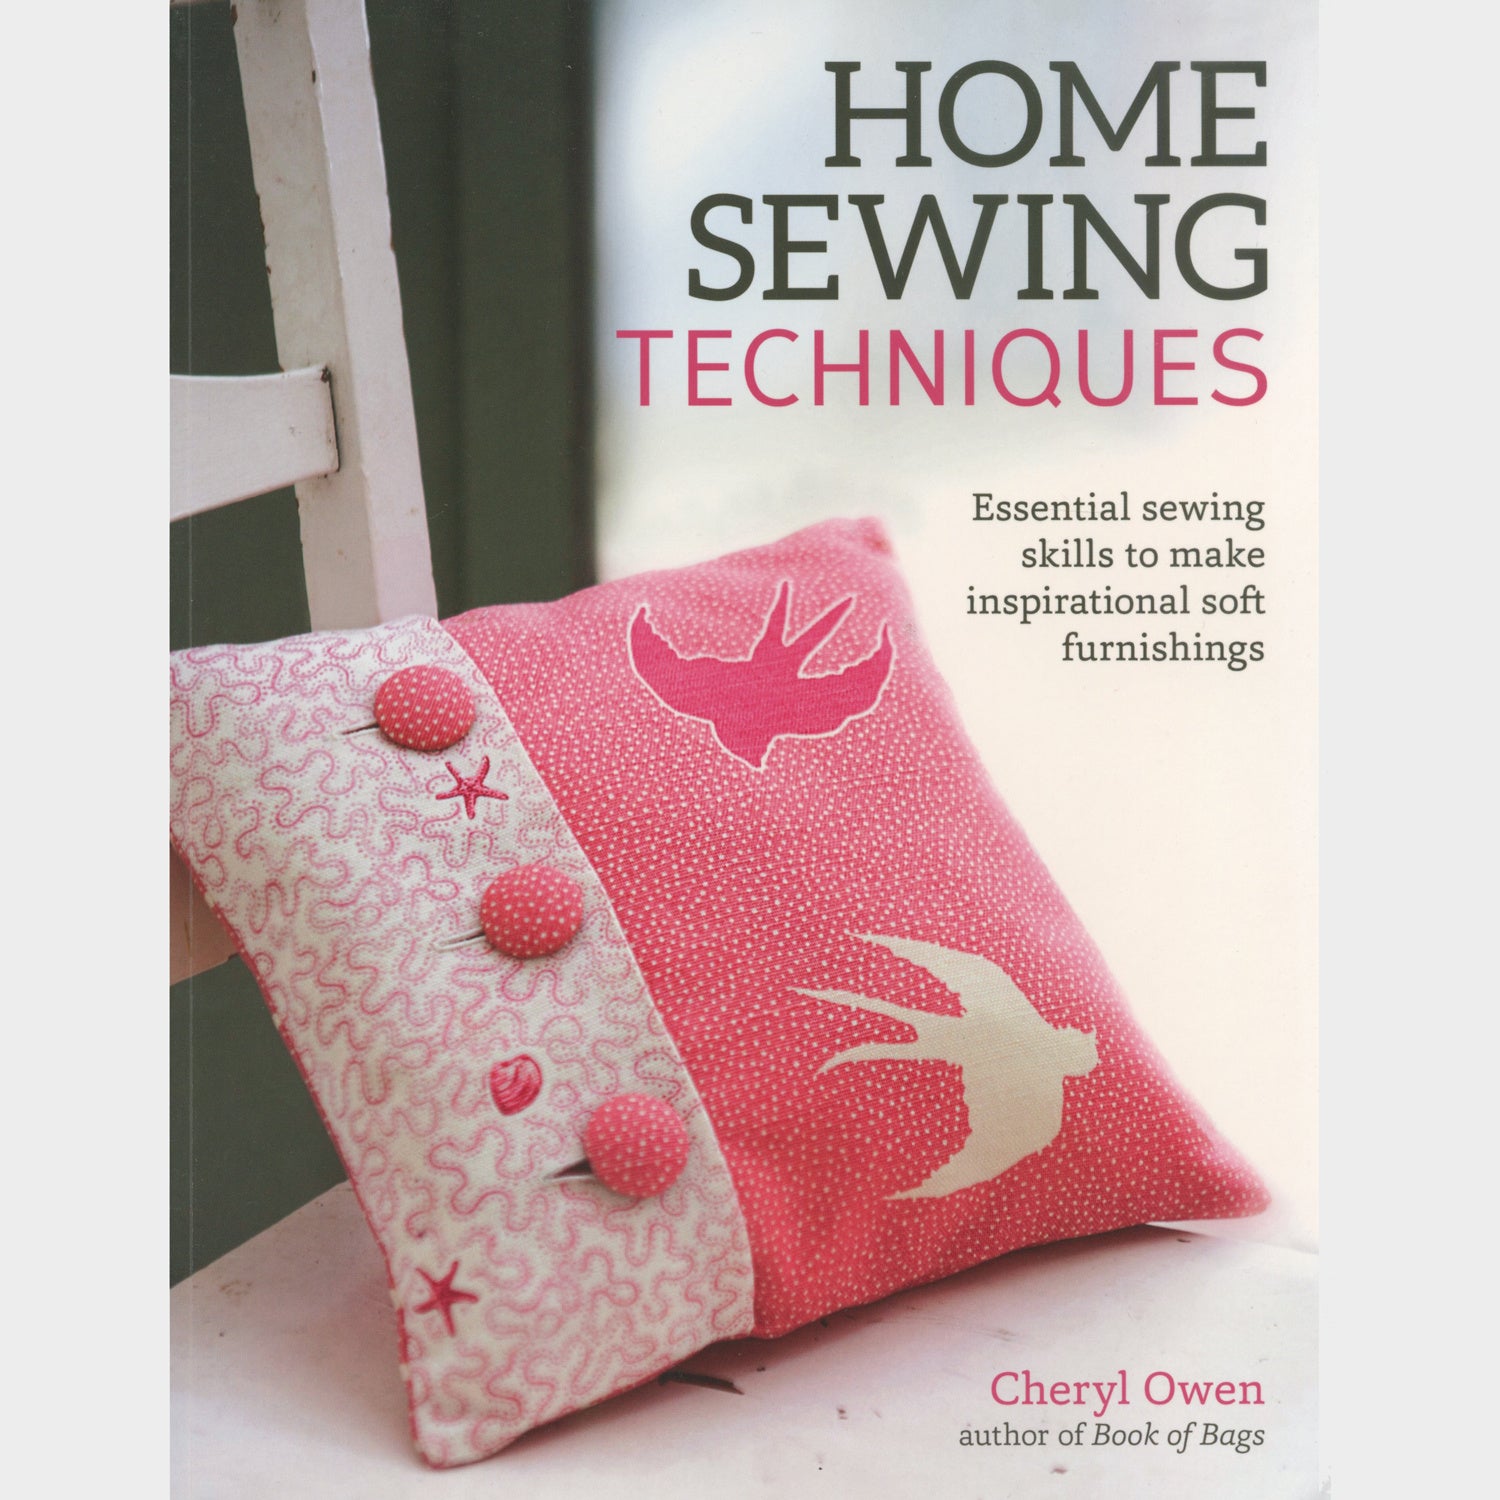 Sewing for the Home [Book]